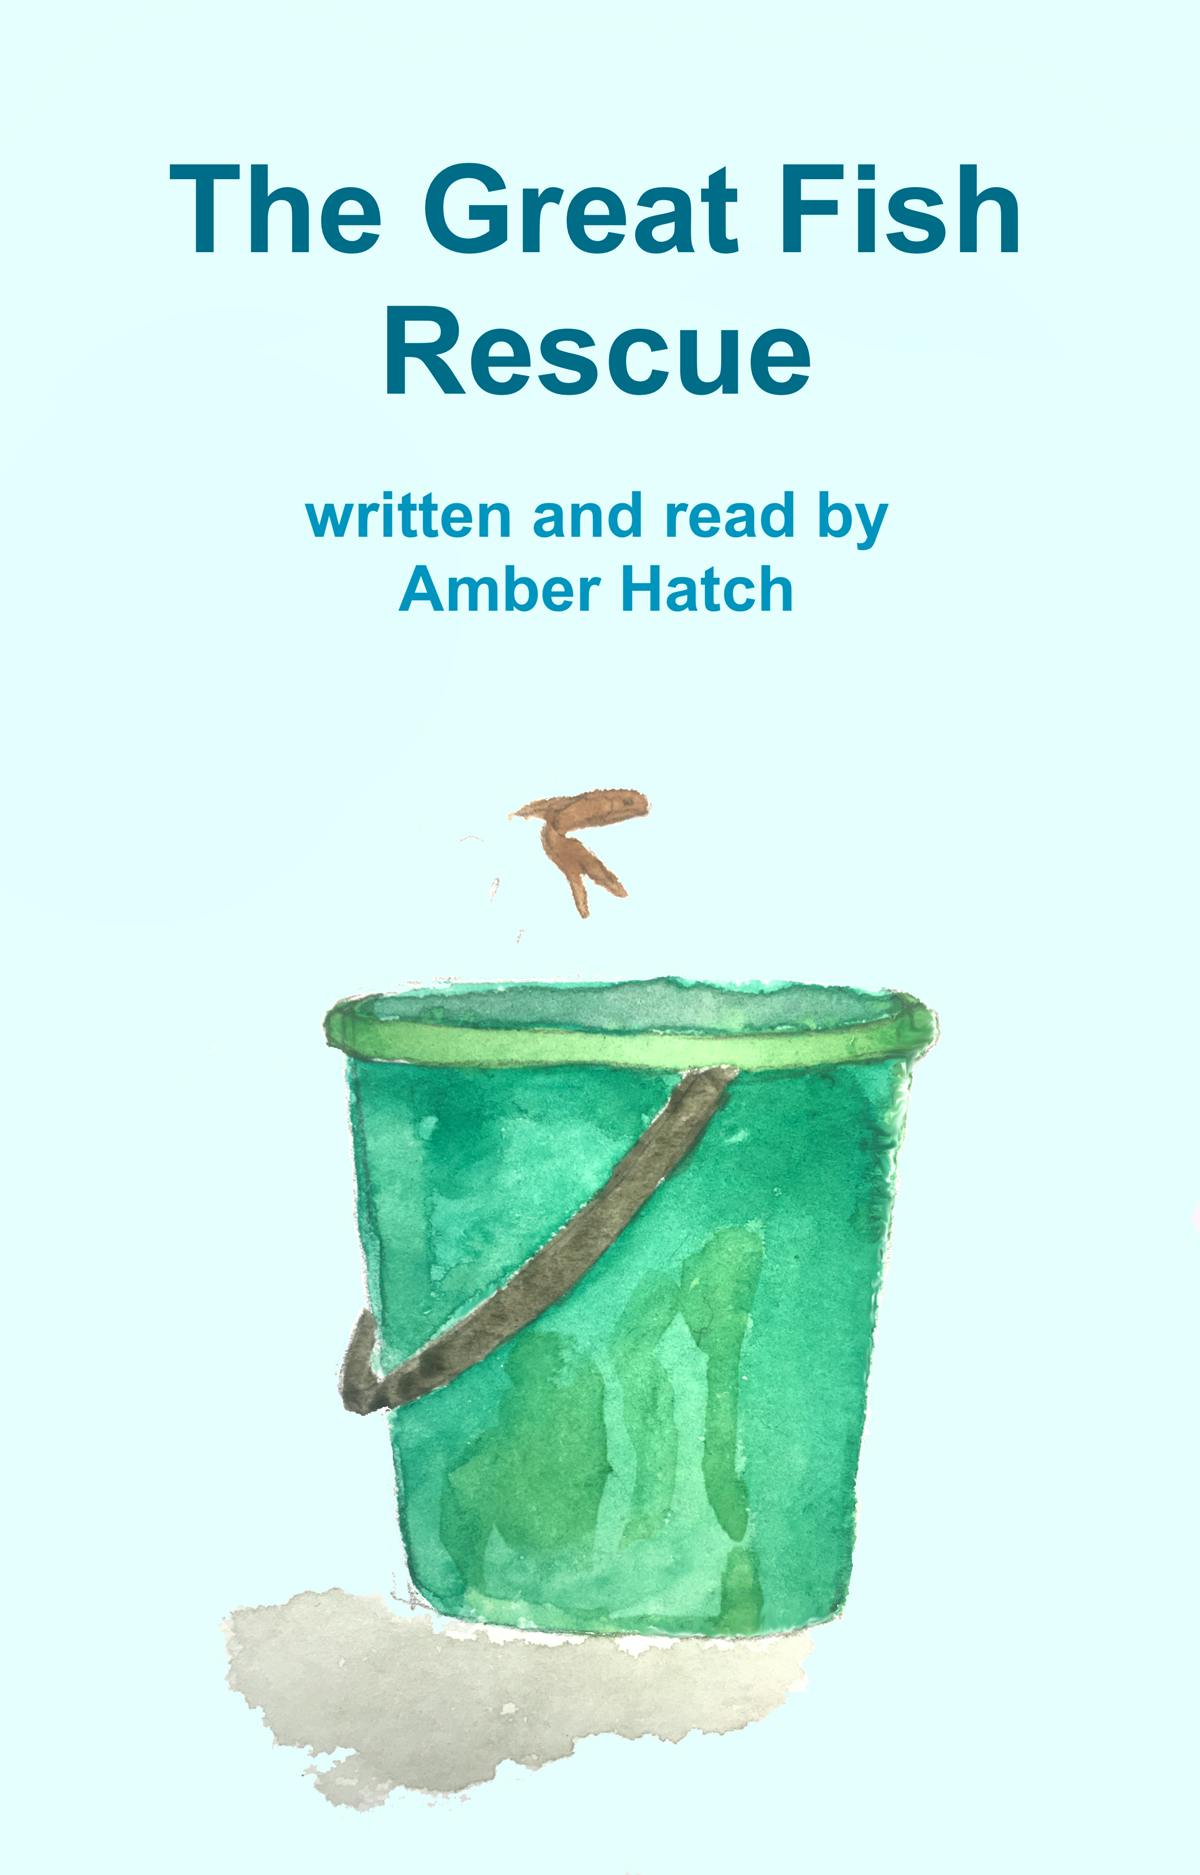 great-fish-rescue-card-art.png